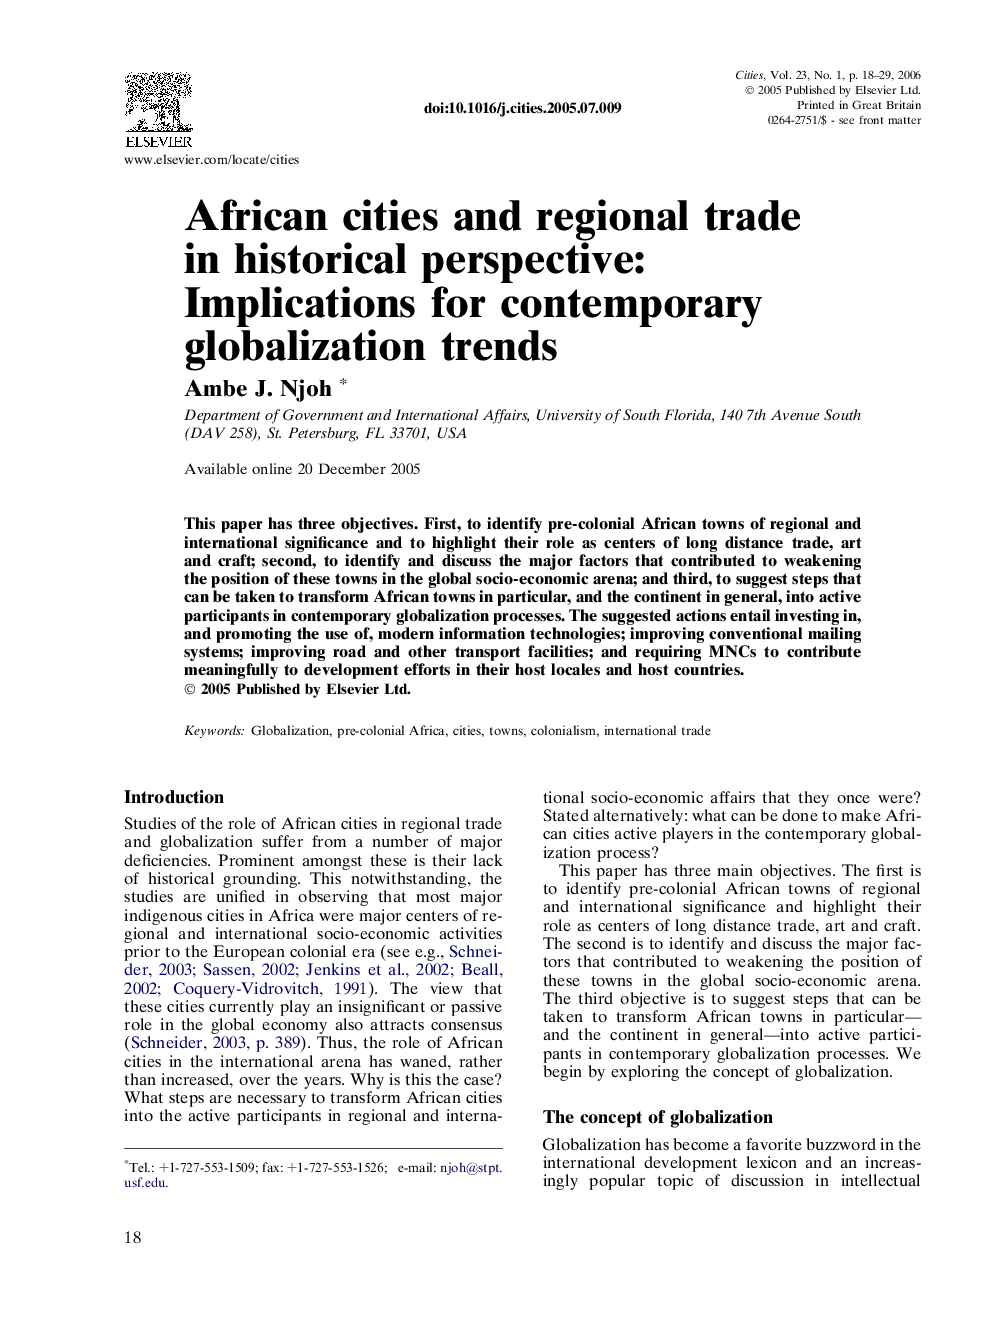 African cities and regional trade in historical perspective: Implications for contemporary globalization trends